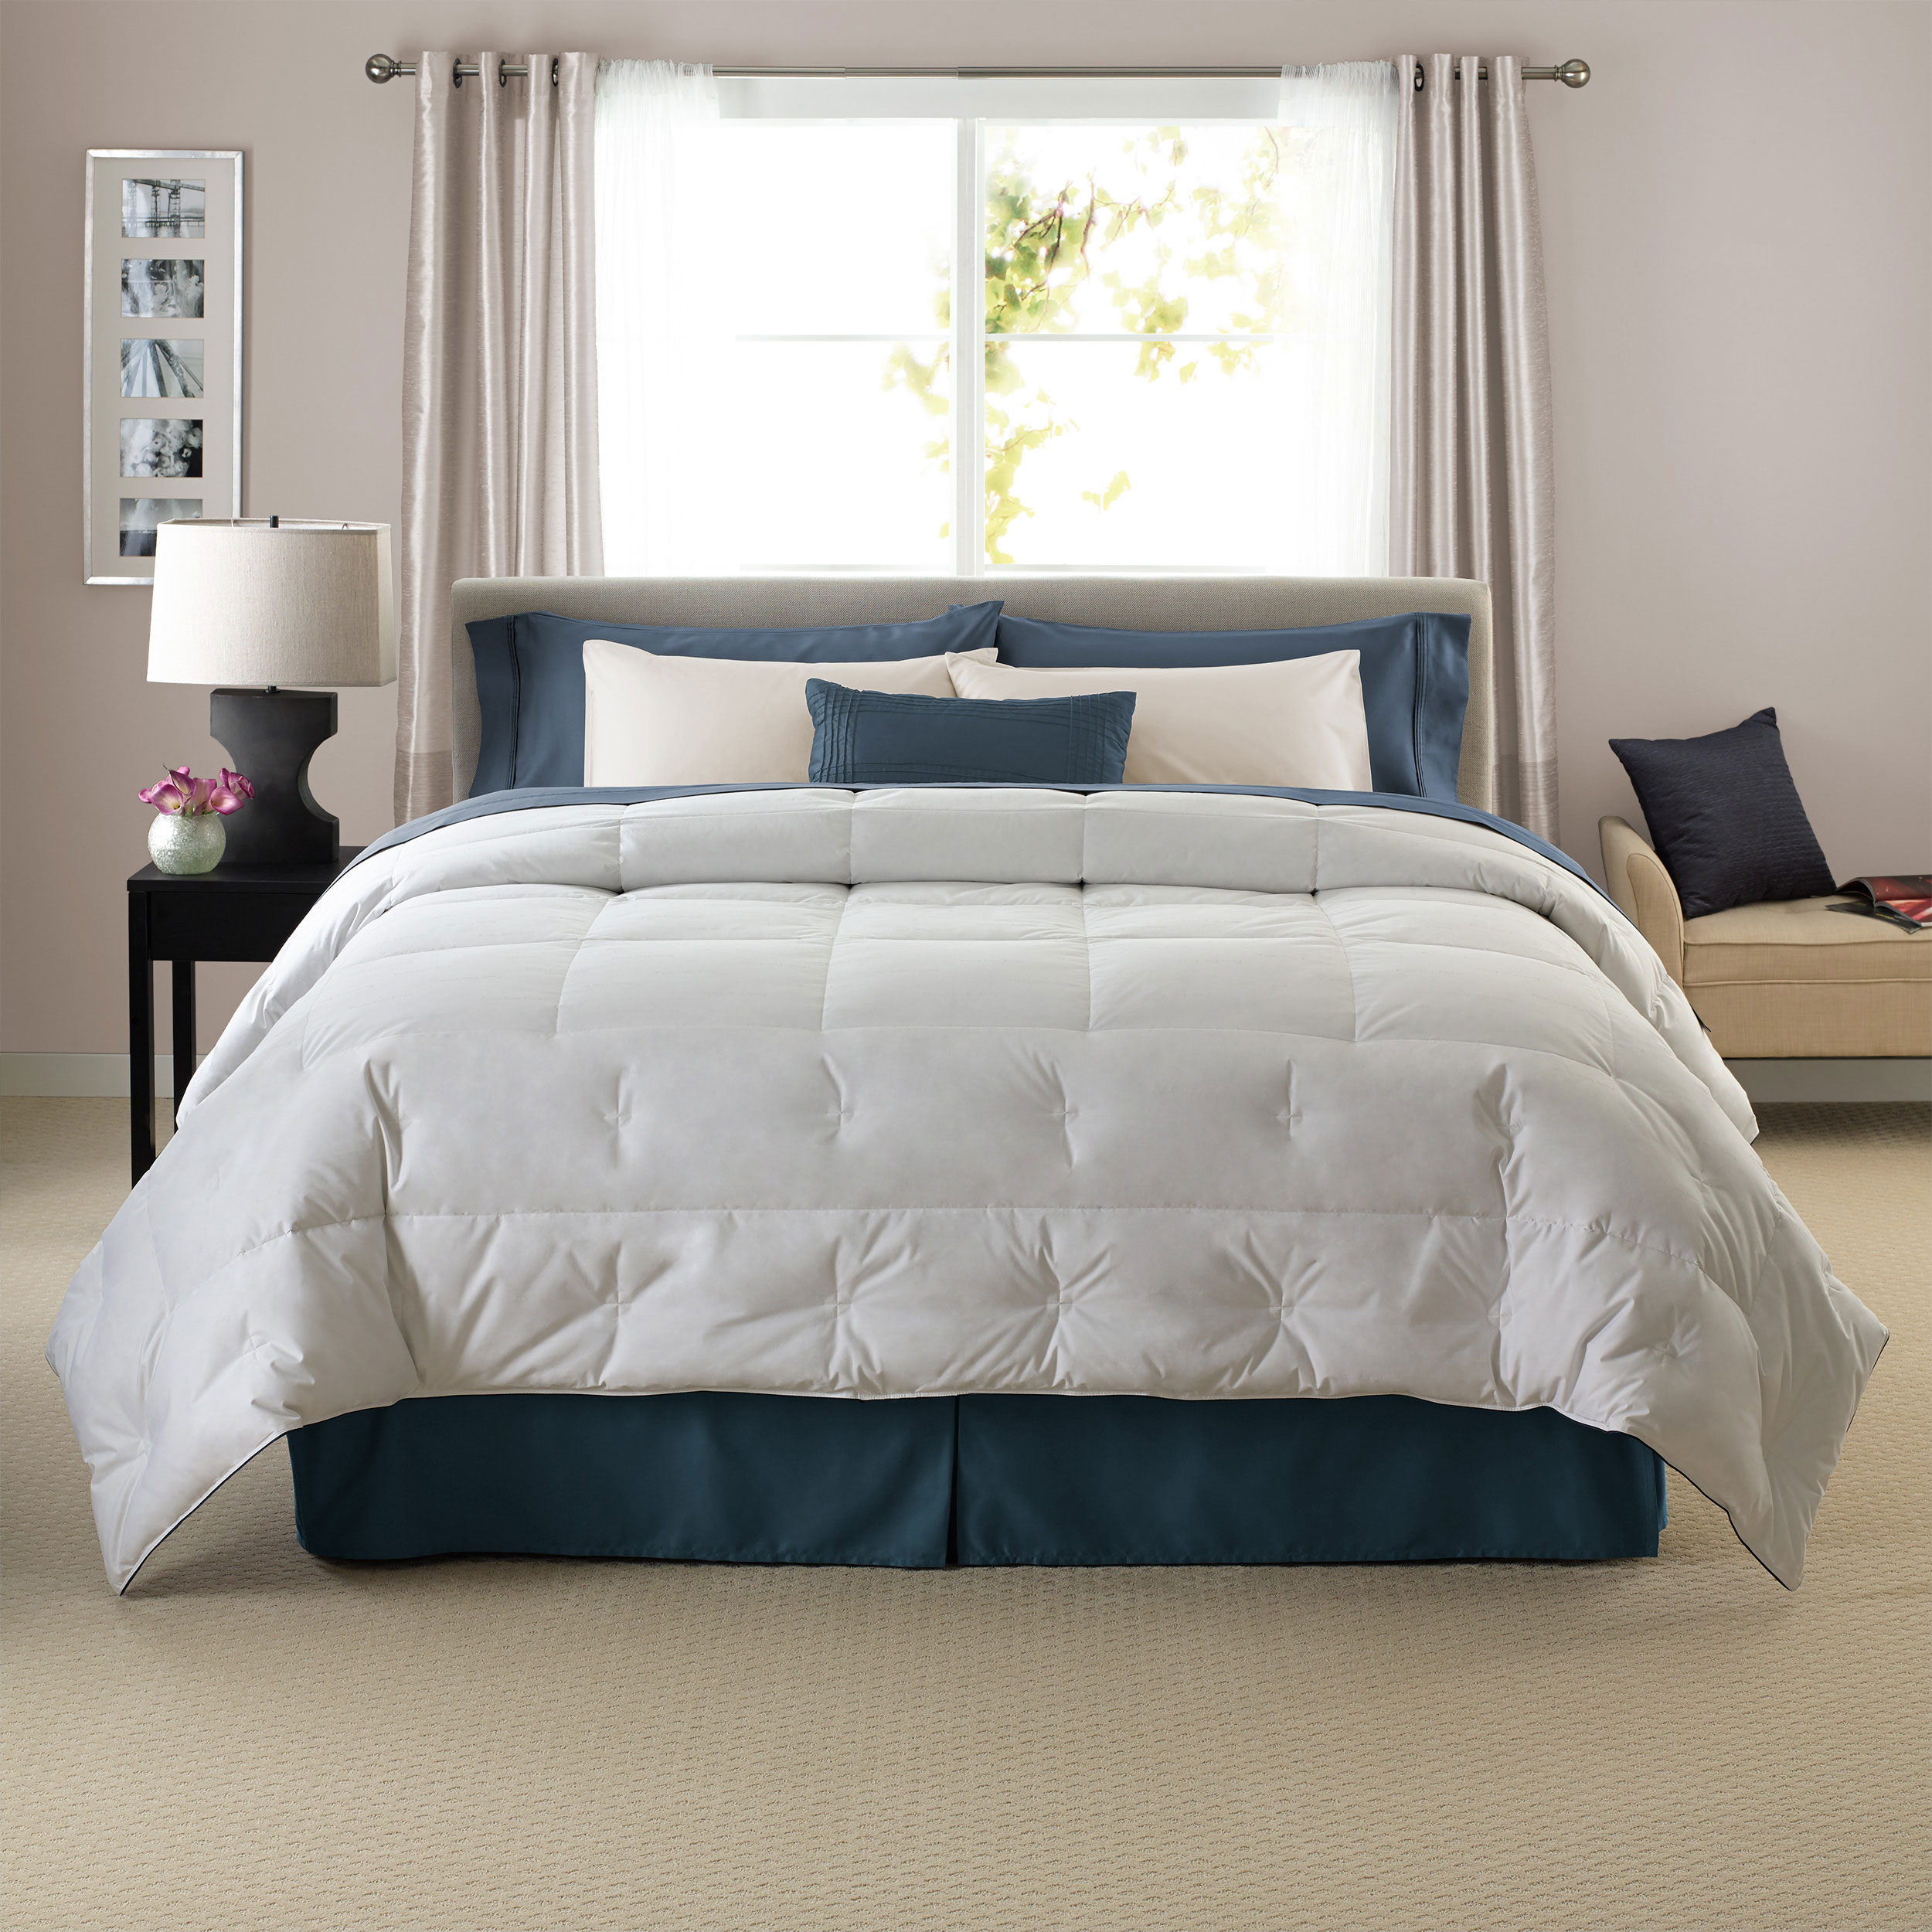 Image of Grand Down Comforter | Pacific Coast Bedding